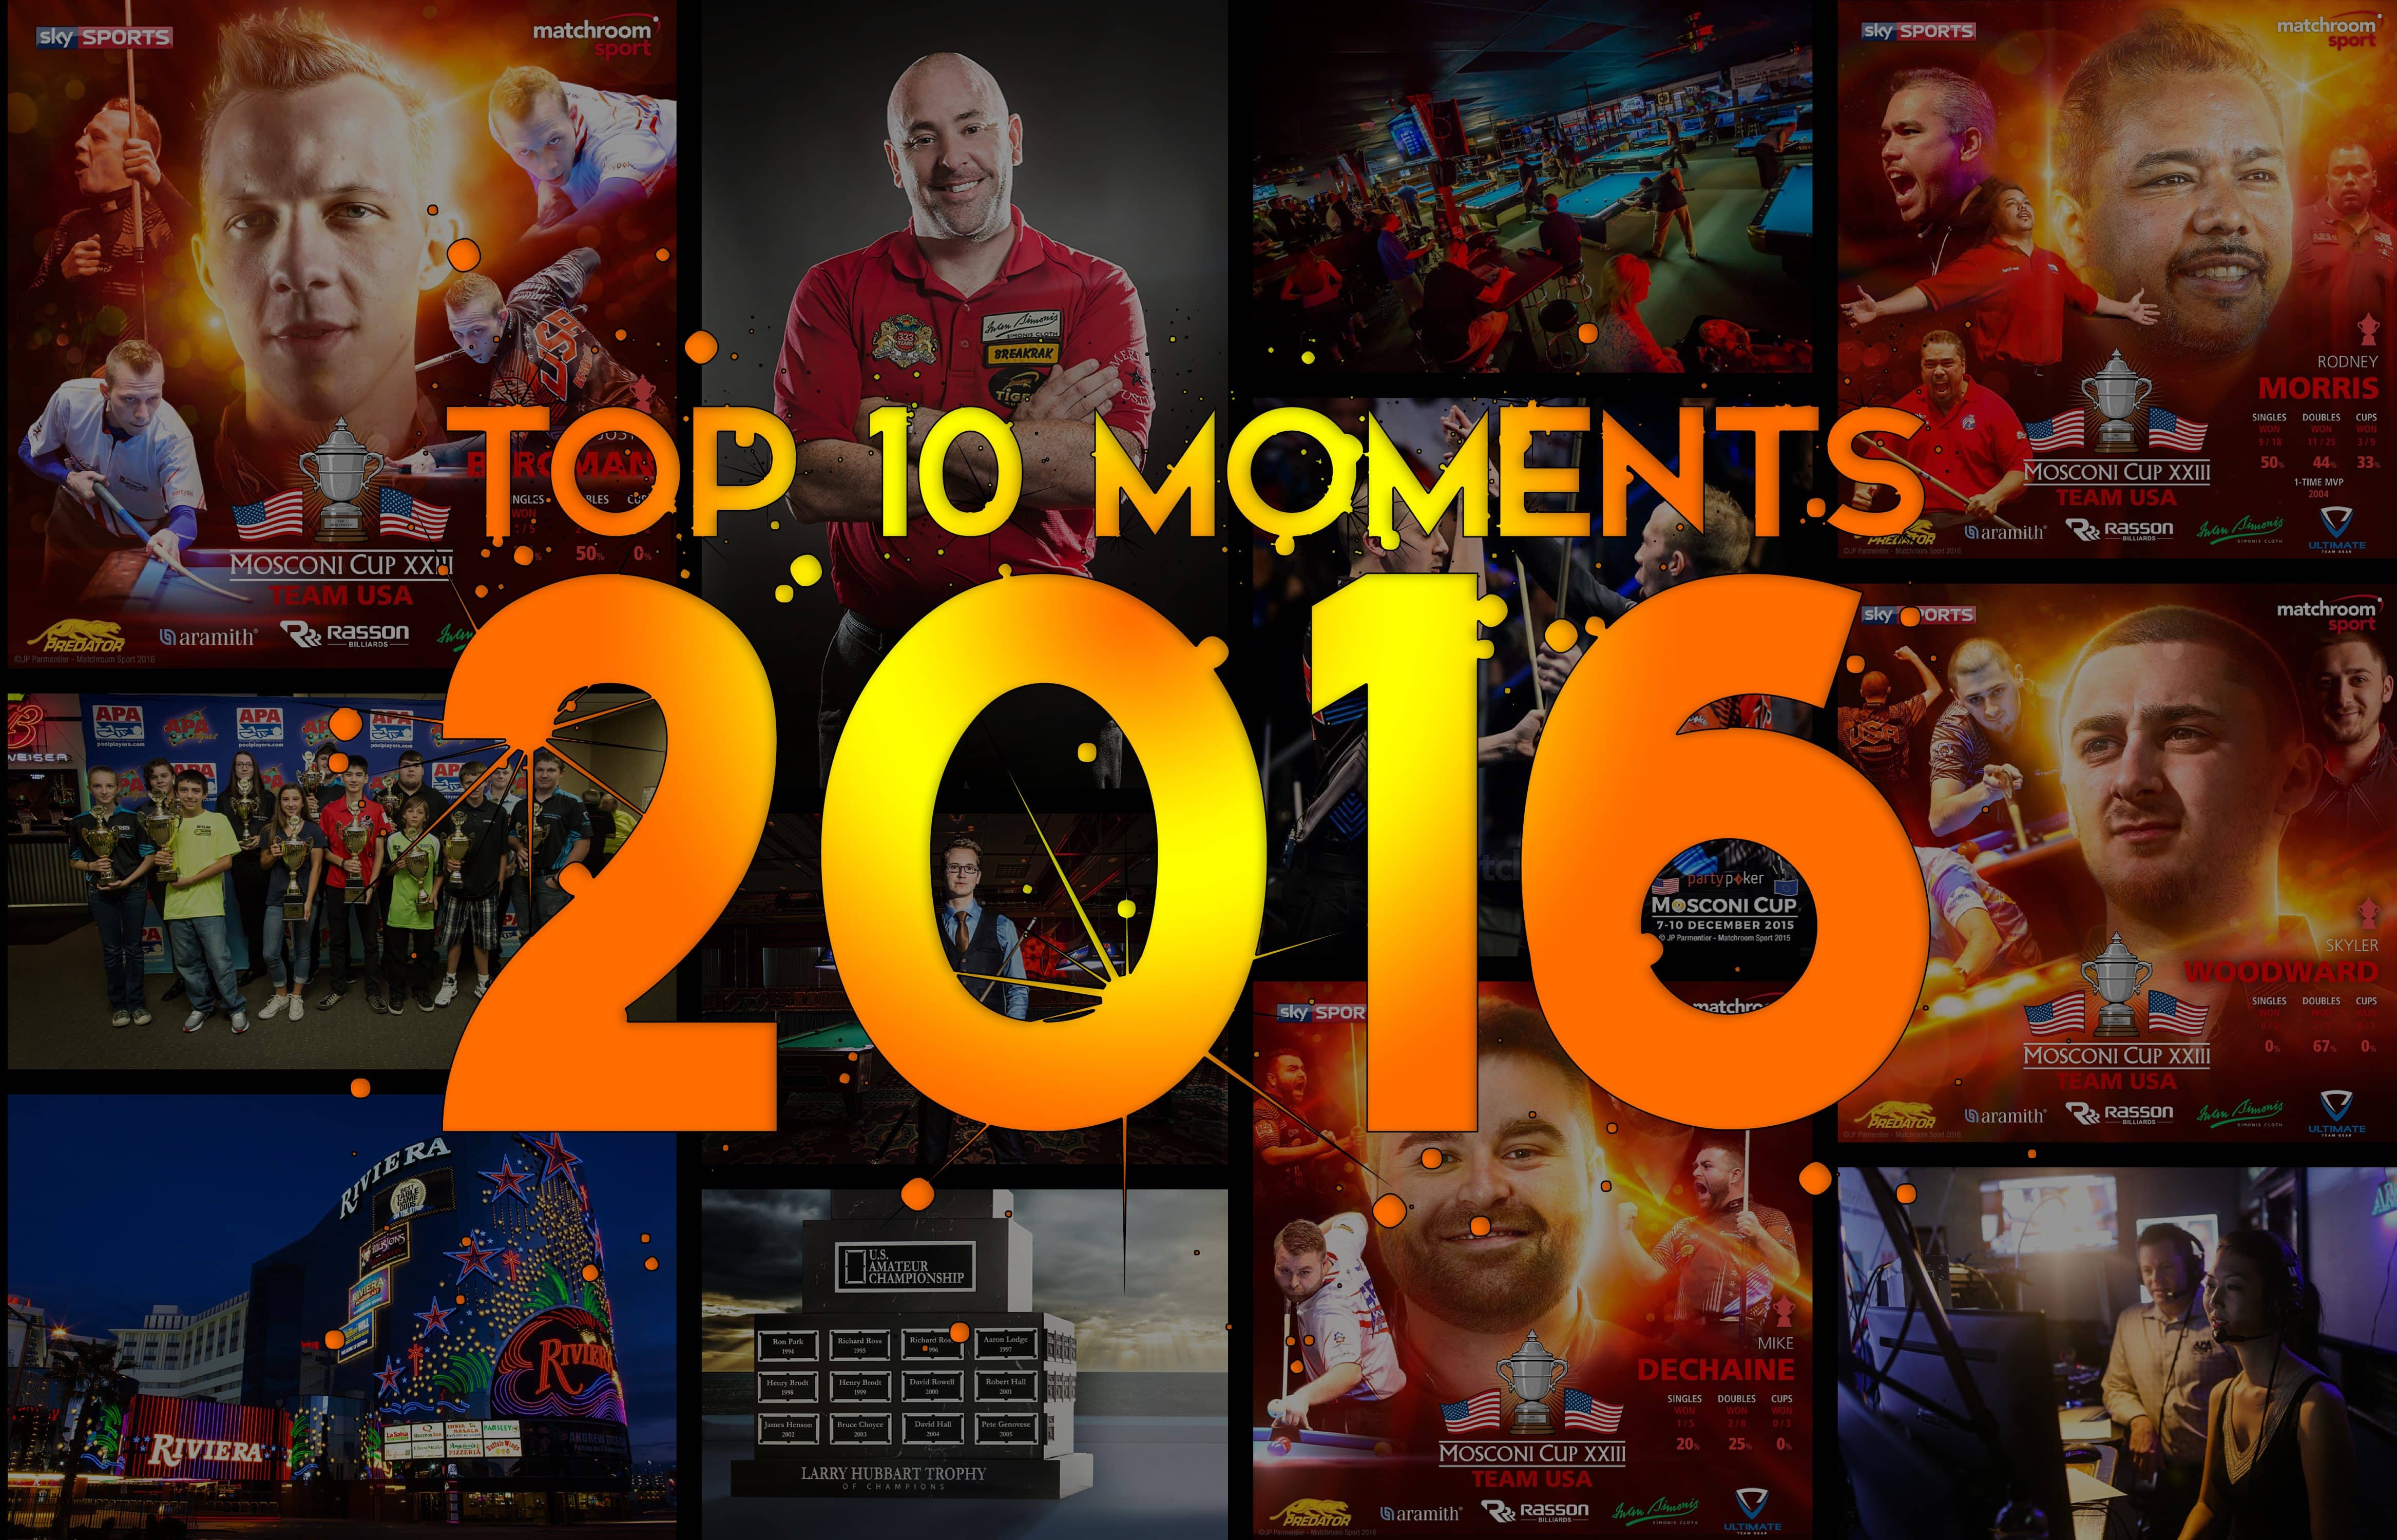 Top 10 Moments of 2016